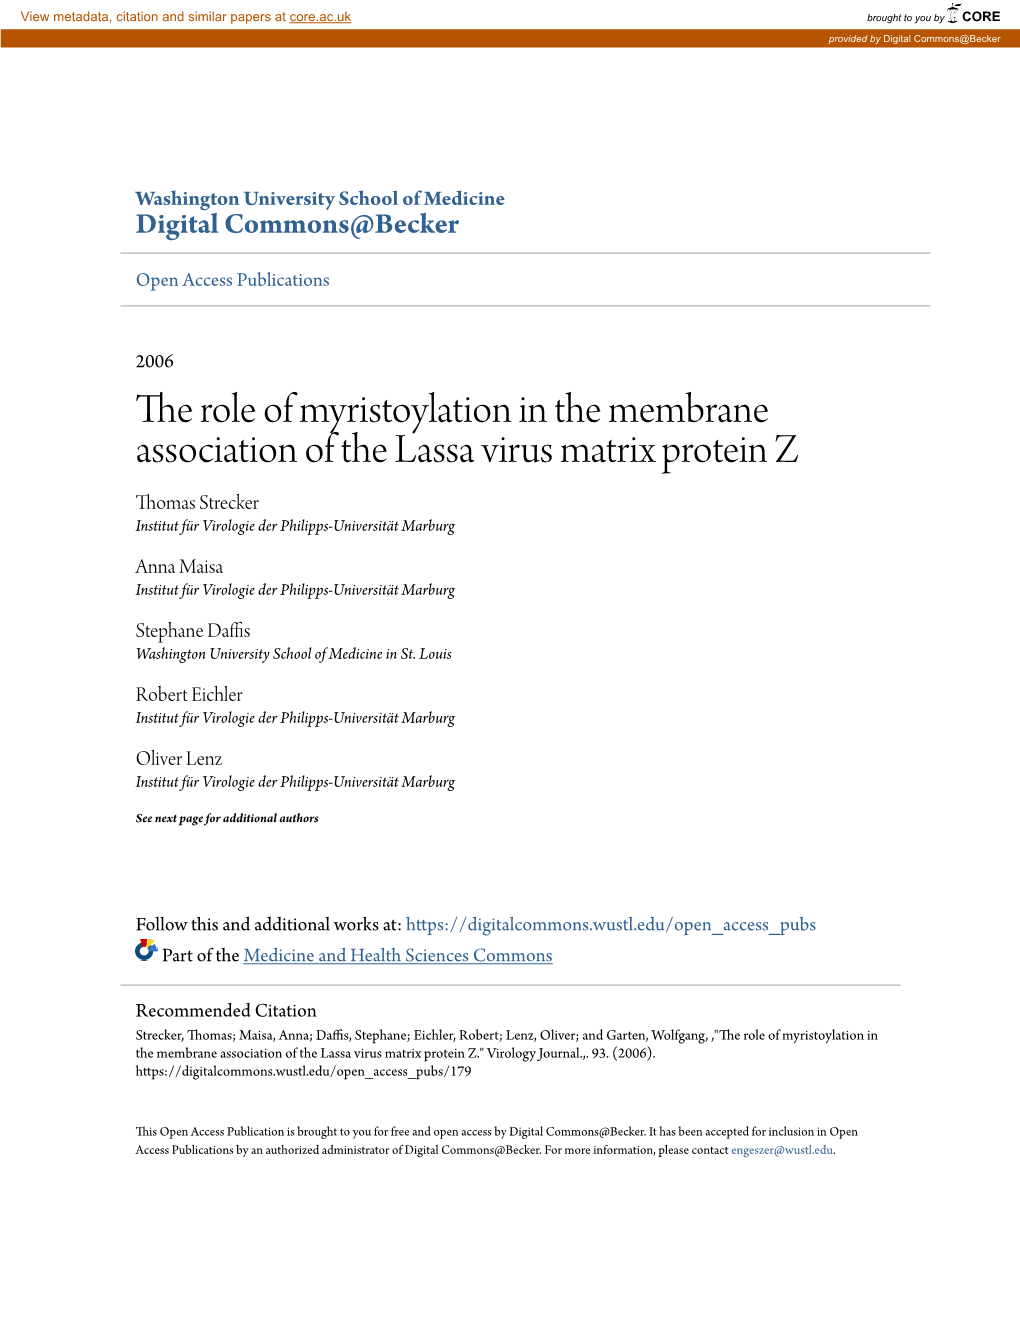 The Role of Myristoylation in the Membrane Association of the Lassa